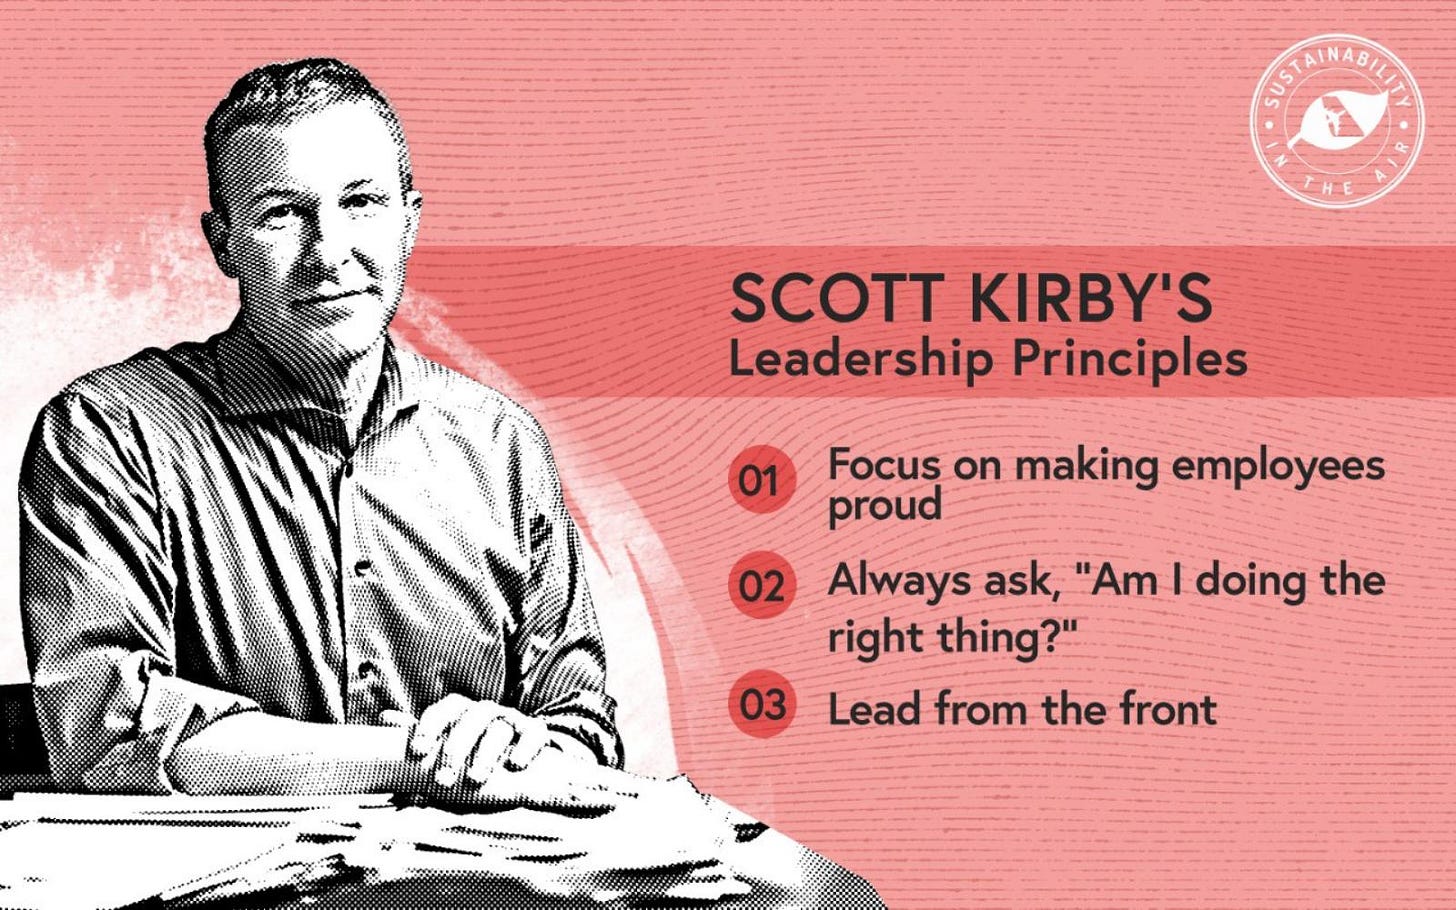 United Airlines' CEO Scott Kirby's leadership principles.